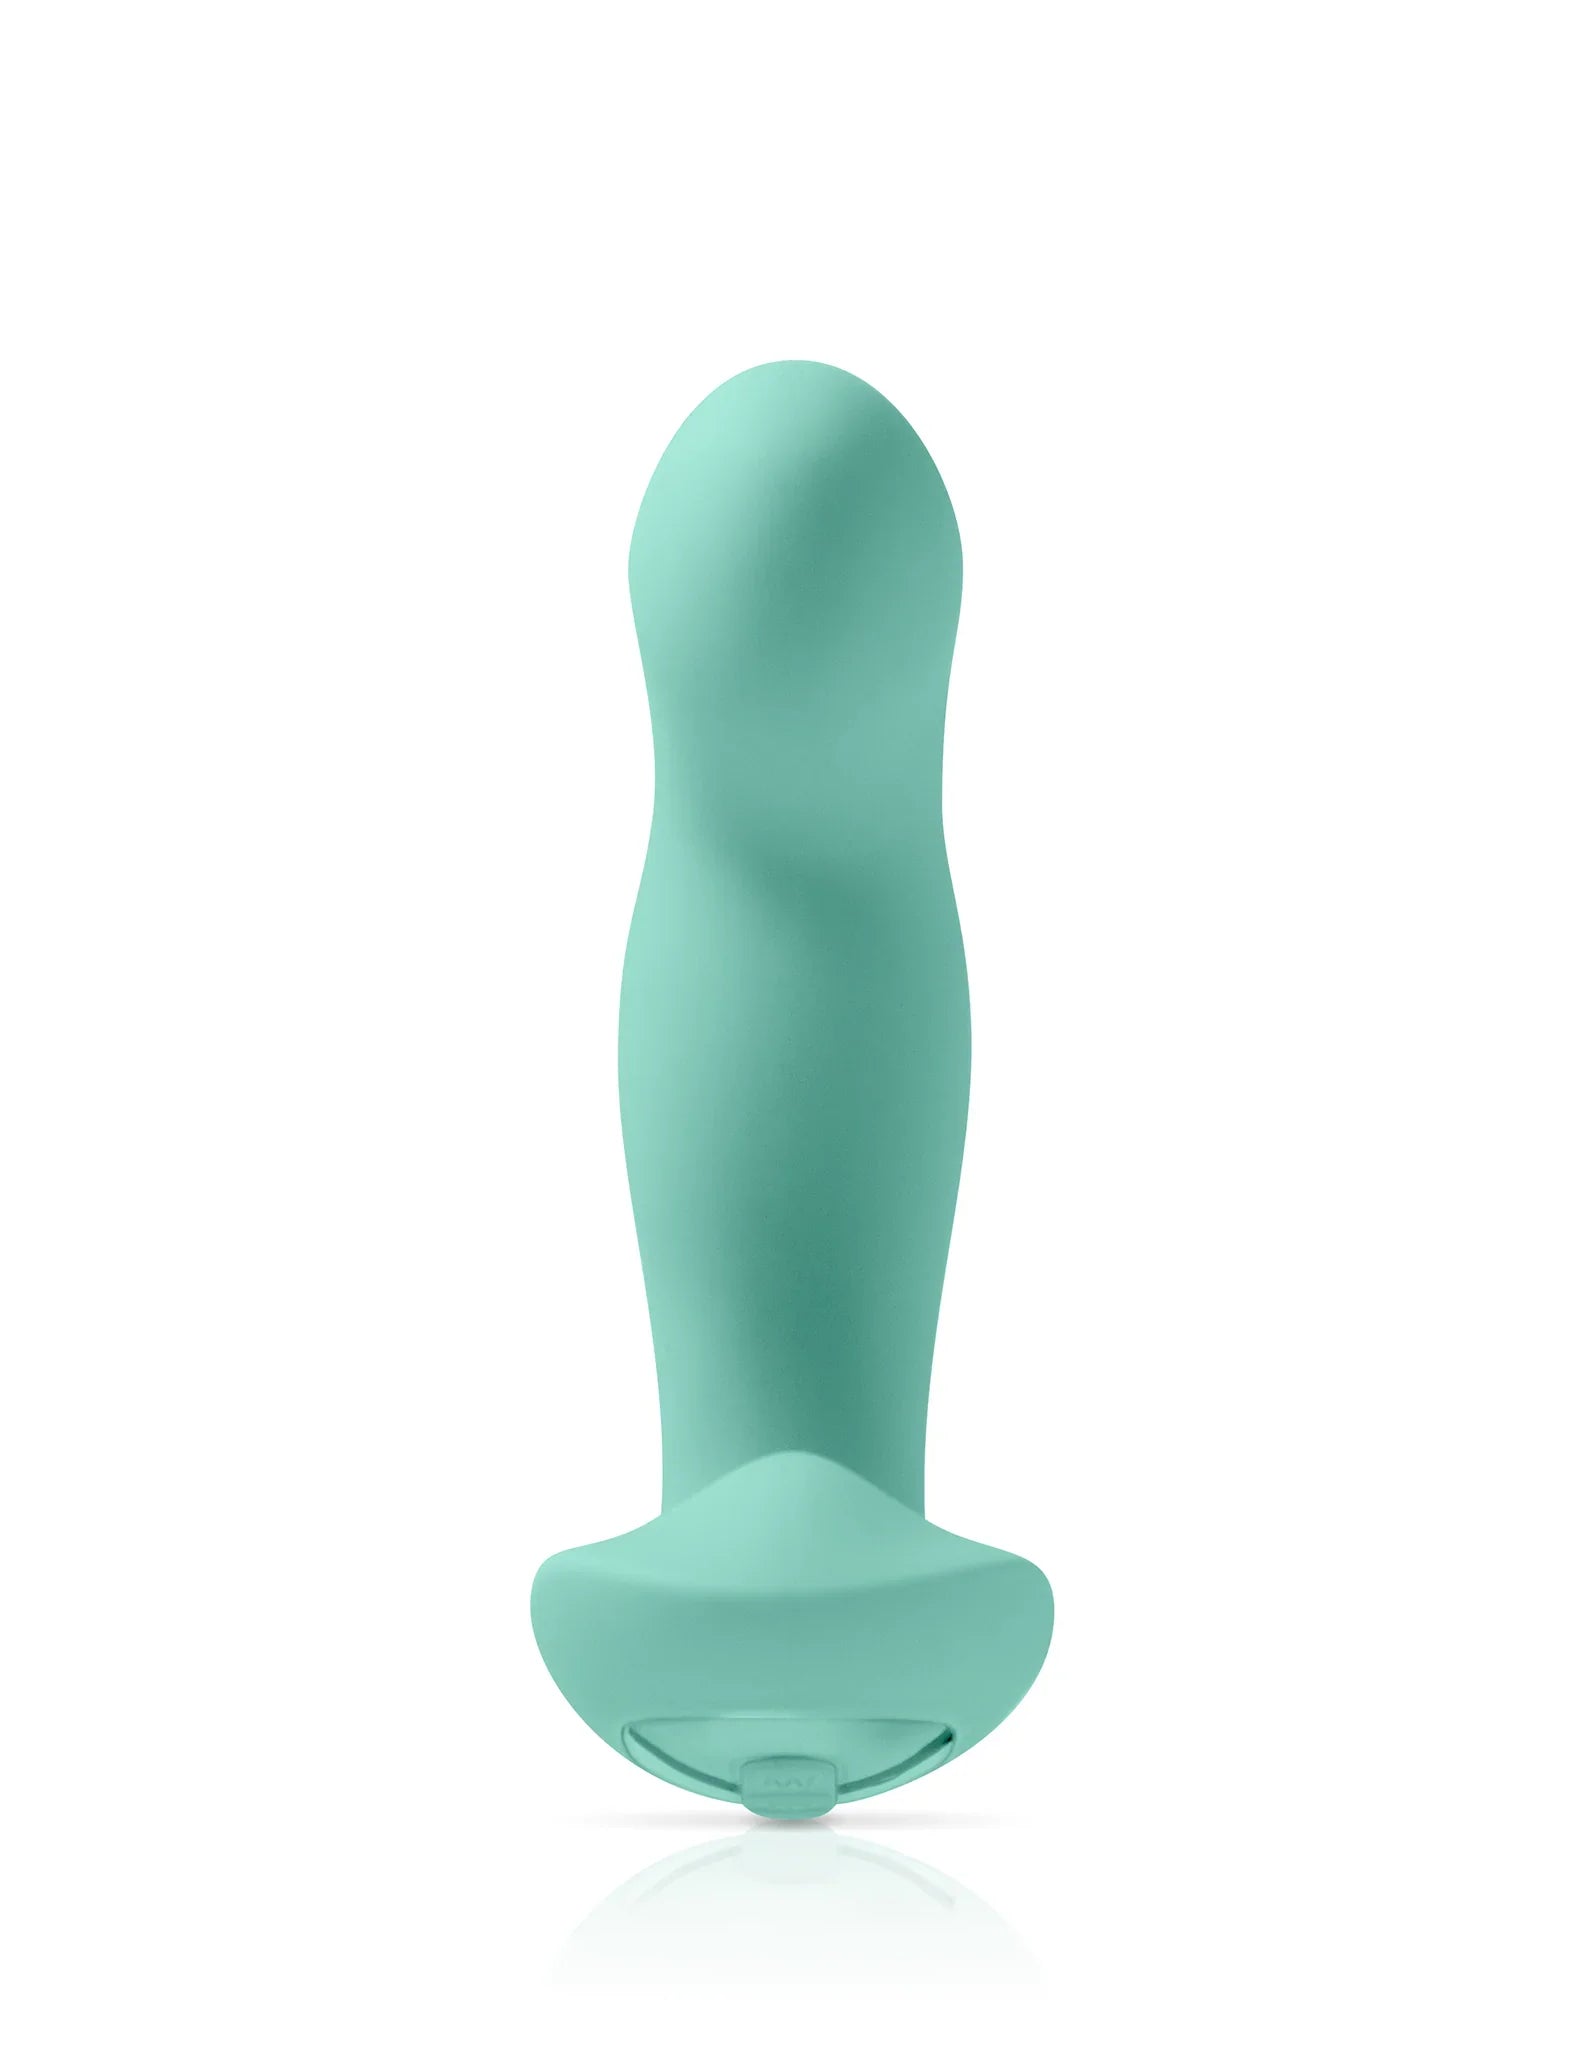 Pulsus G-Spot Vibrator for women green color front picture